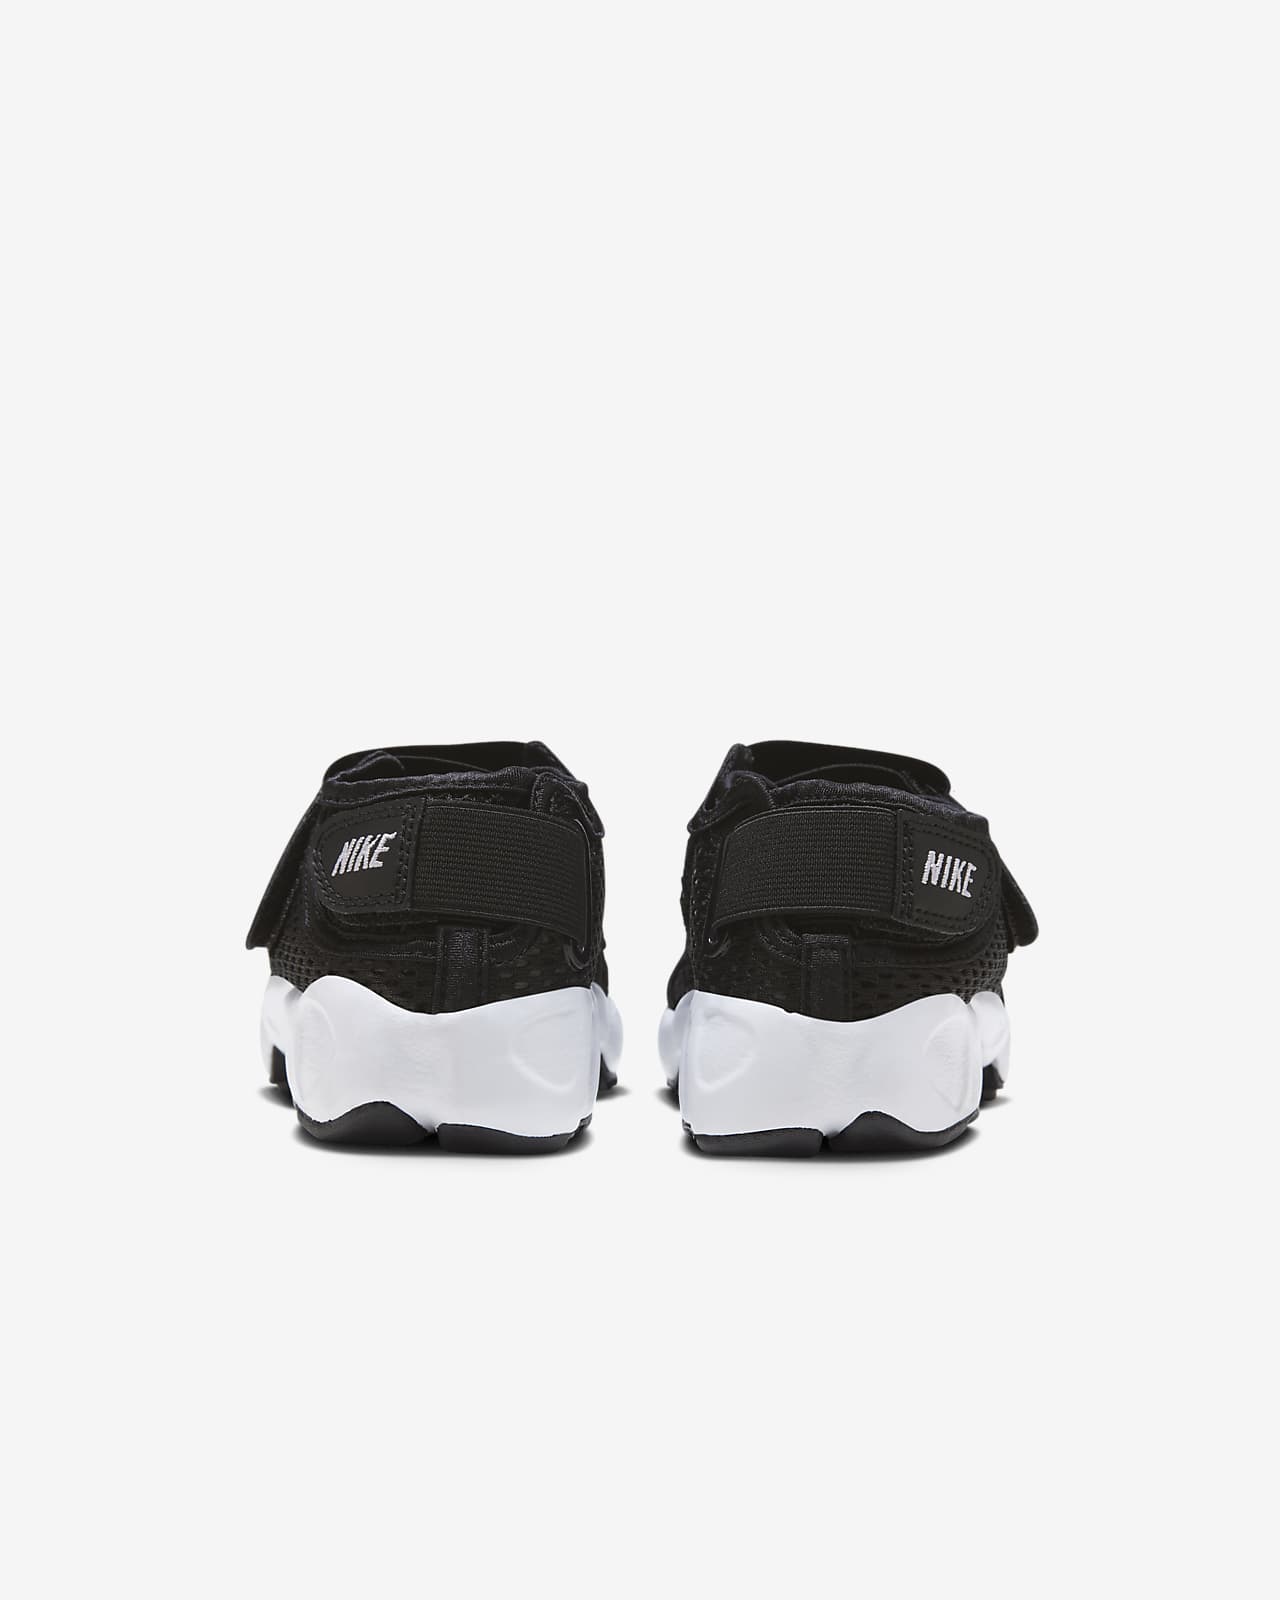 Nike Rift Younger/Older Kids' Shoes. ID